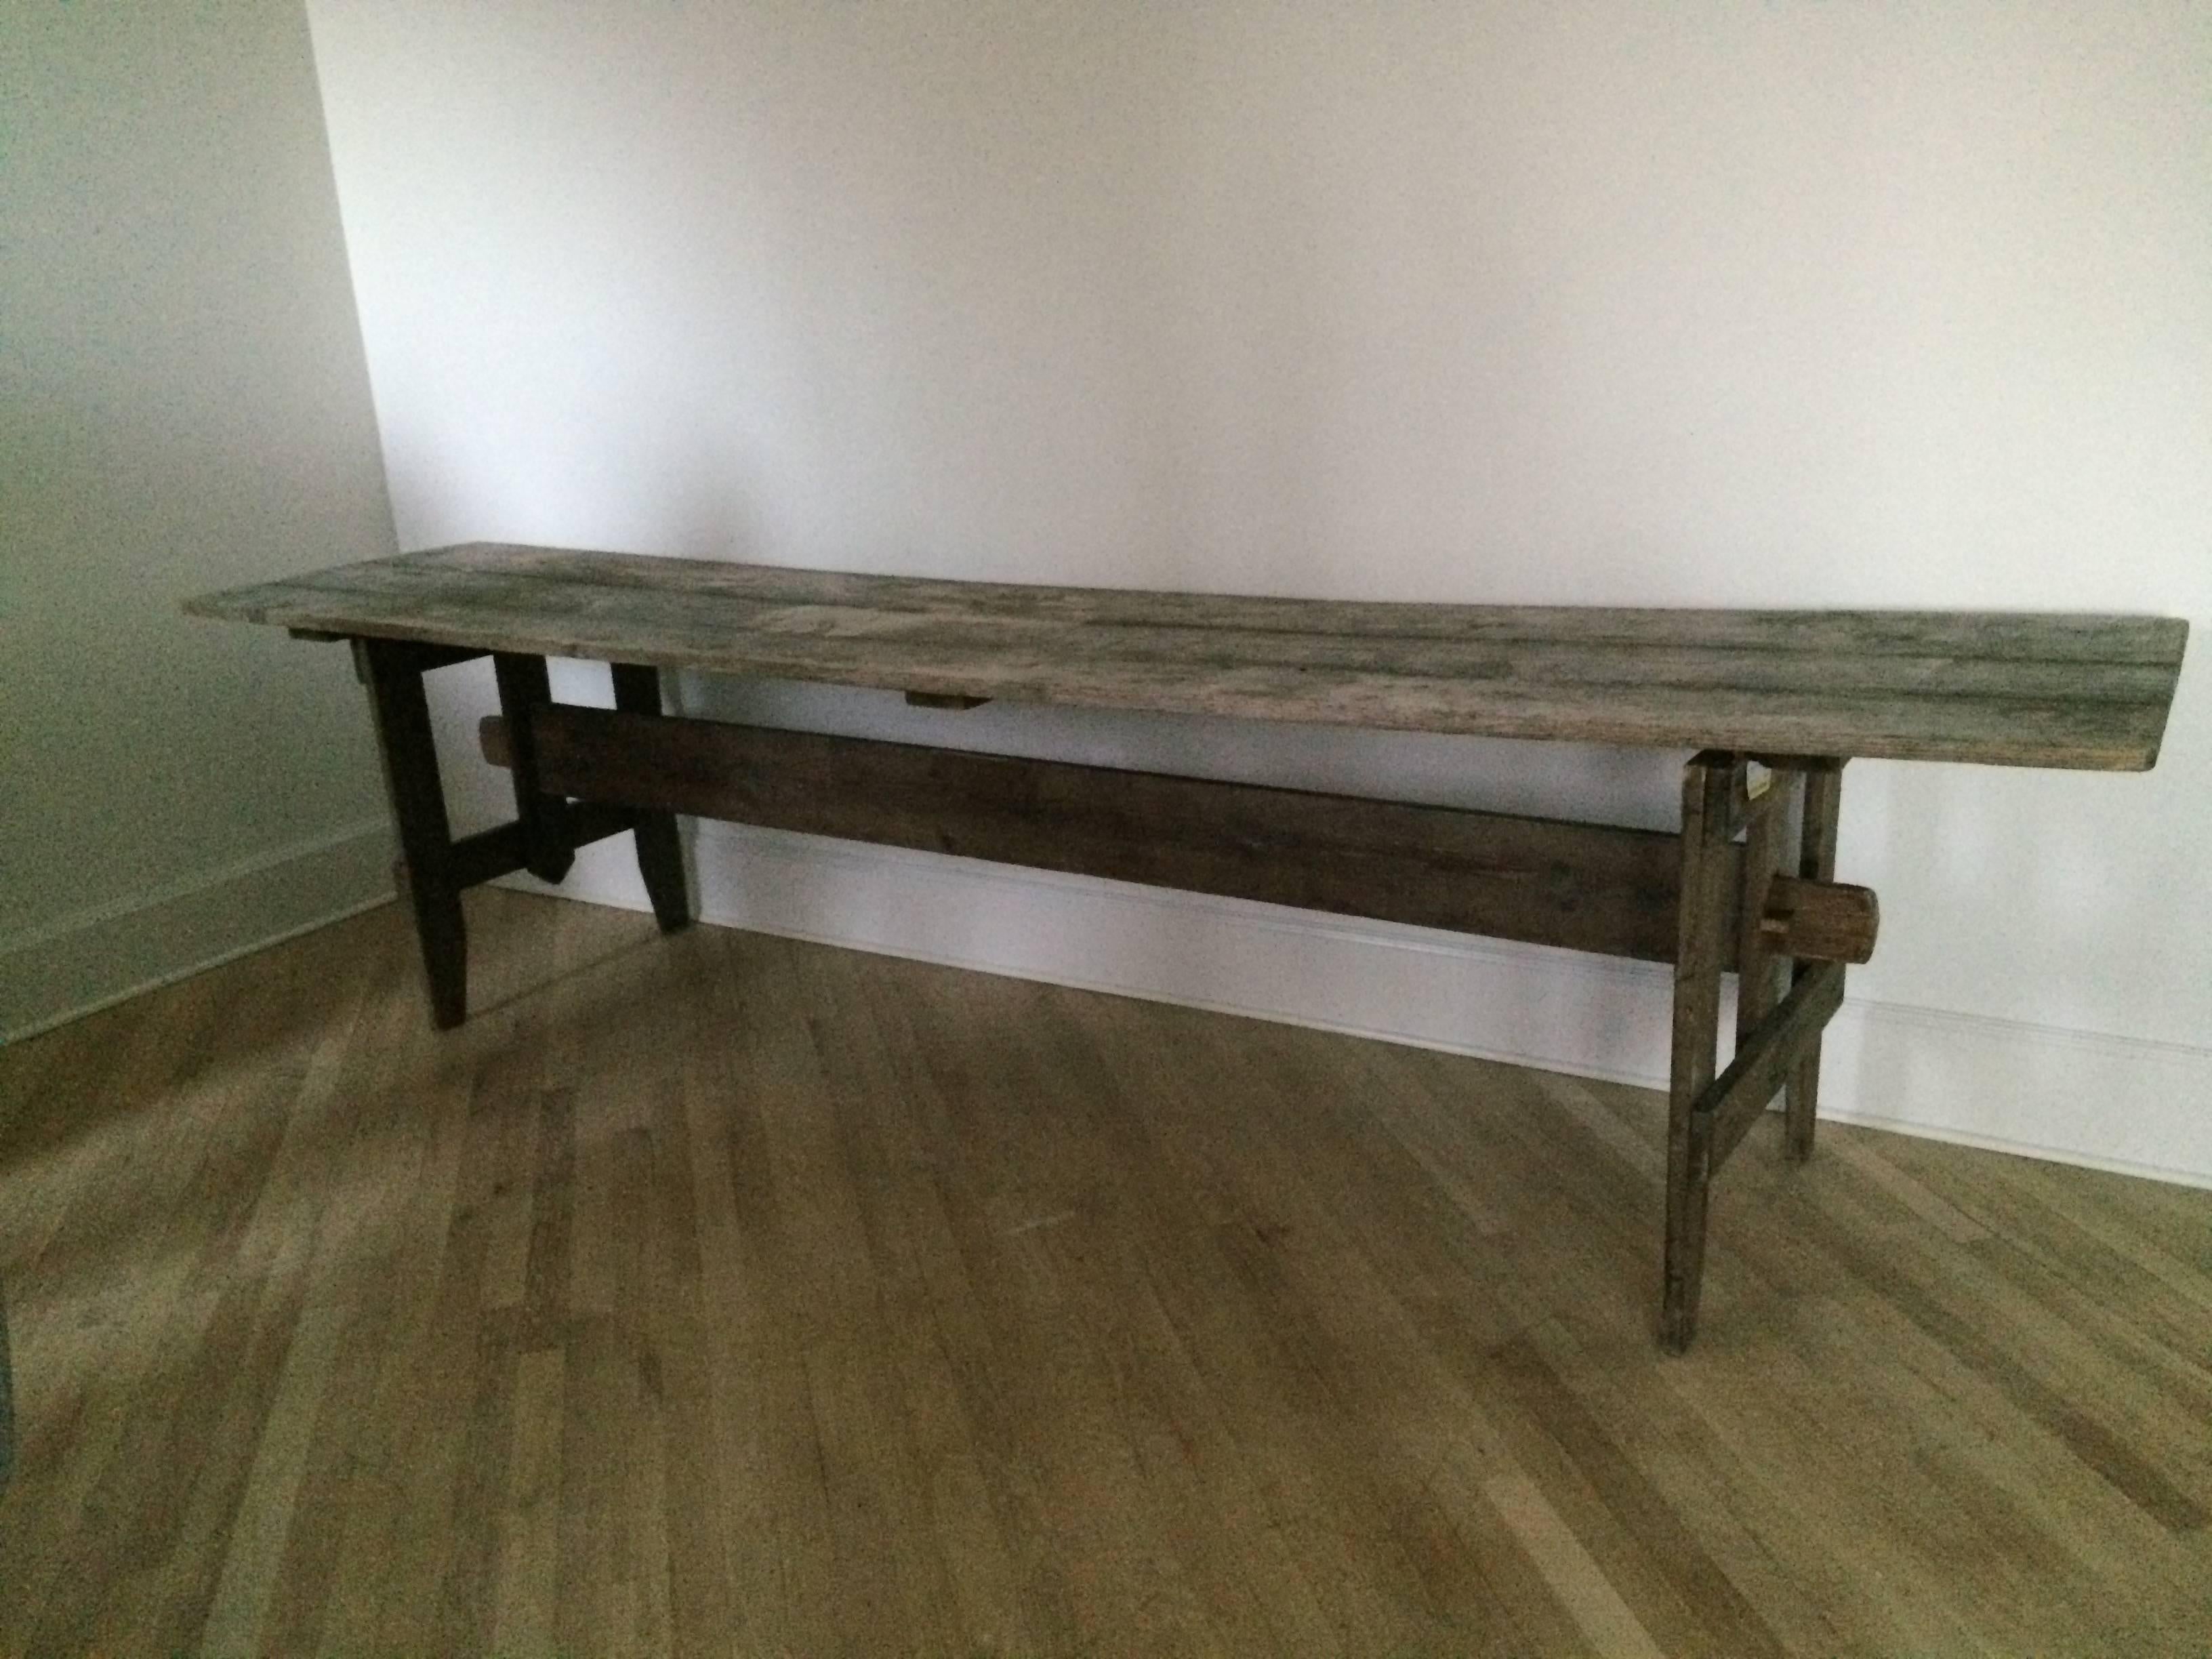 SALE! Bleached French oak farm trestle table. Breaks down for easy transport. Lovely aged patina.